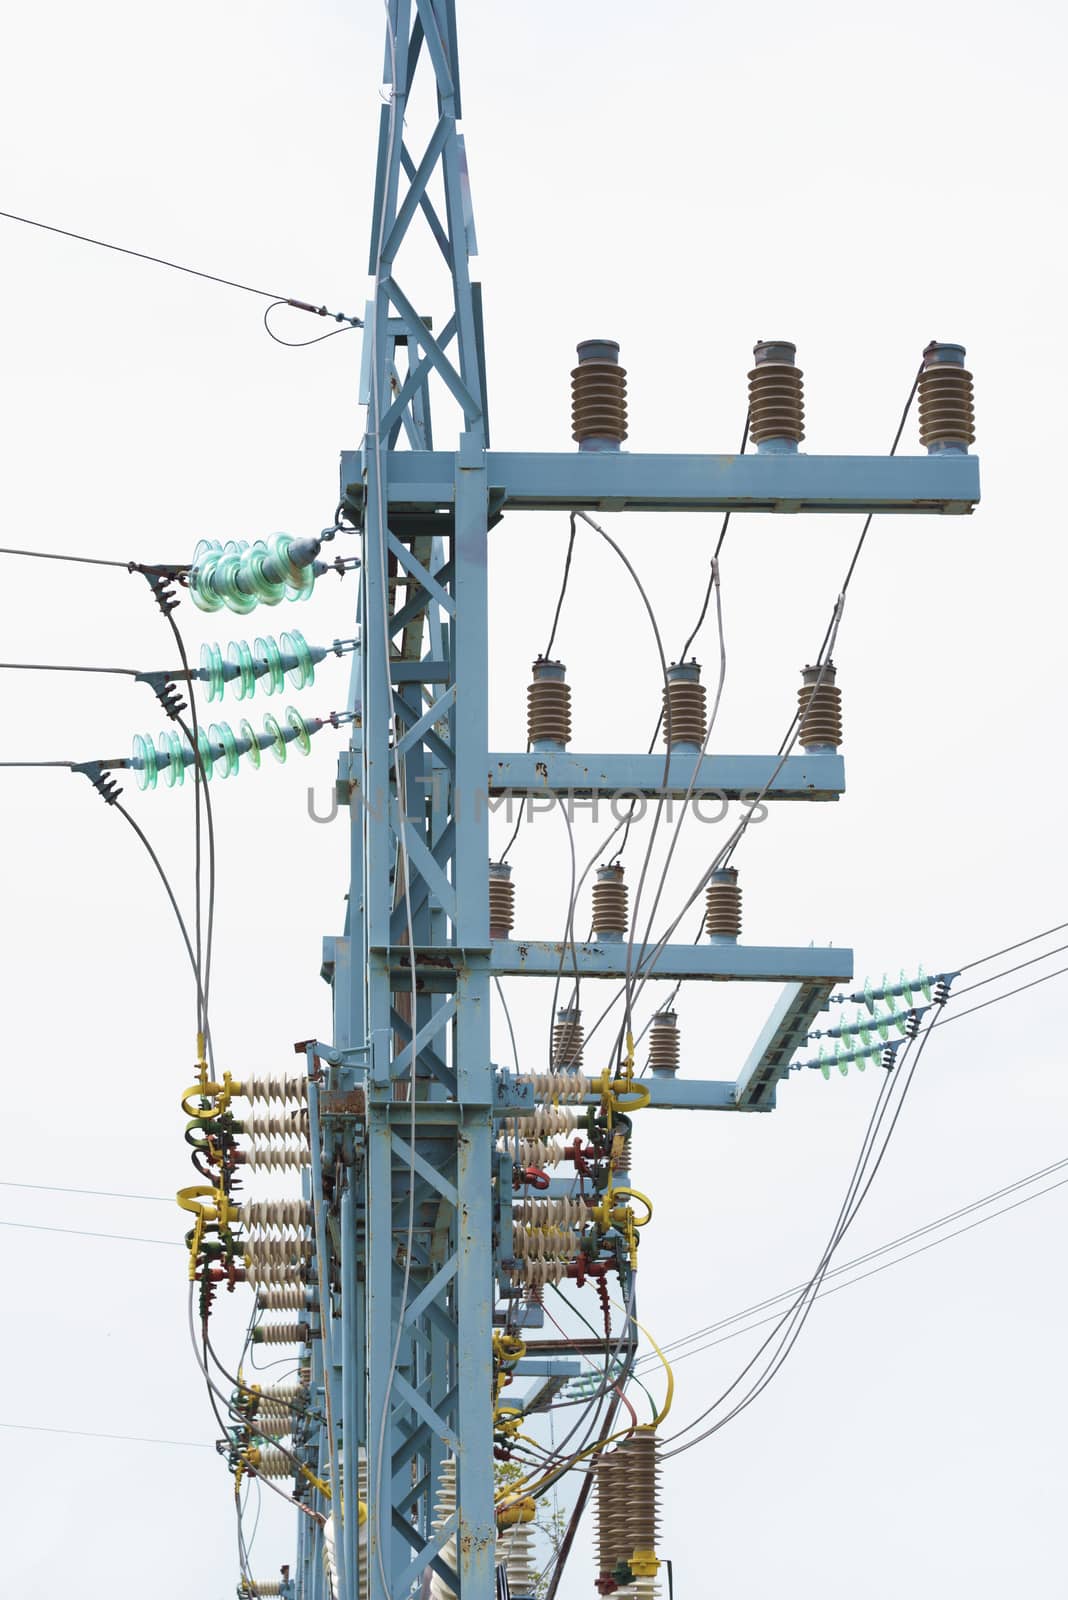 Electric pole on a white background. Garland of insulators on electric wires of high-voltage support